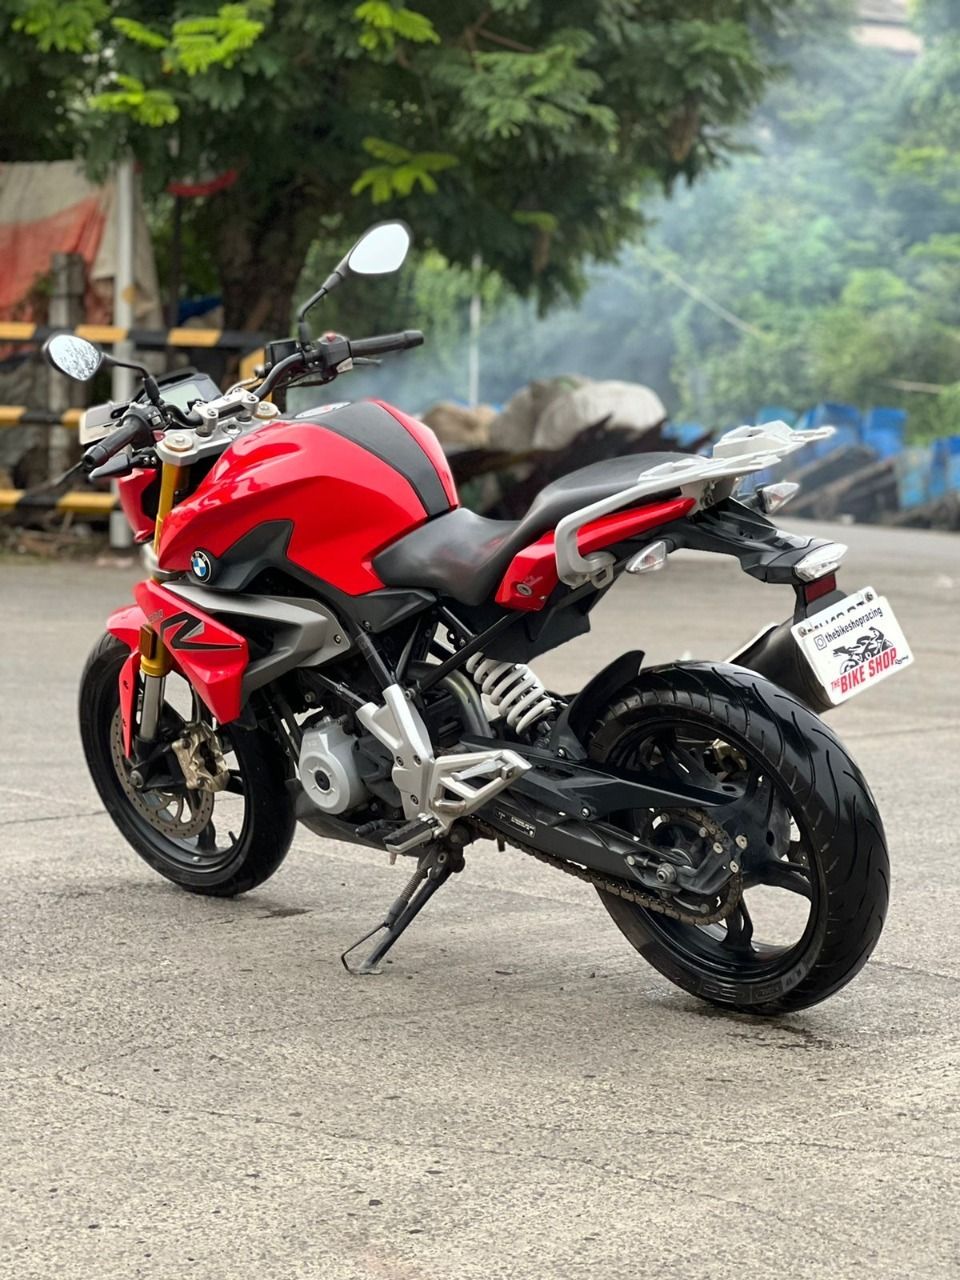 2018 BMW G 310R ABS (Racing red color)